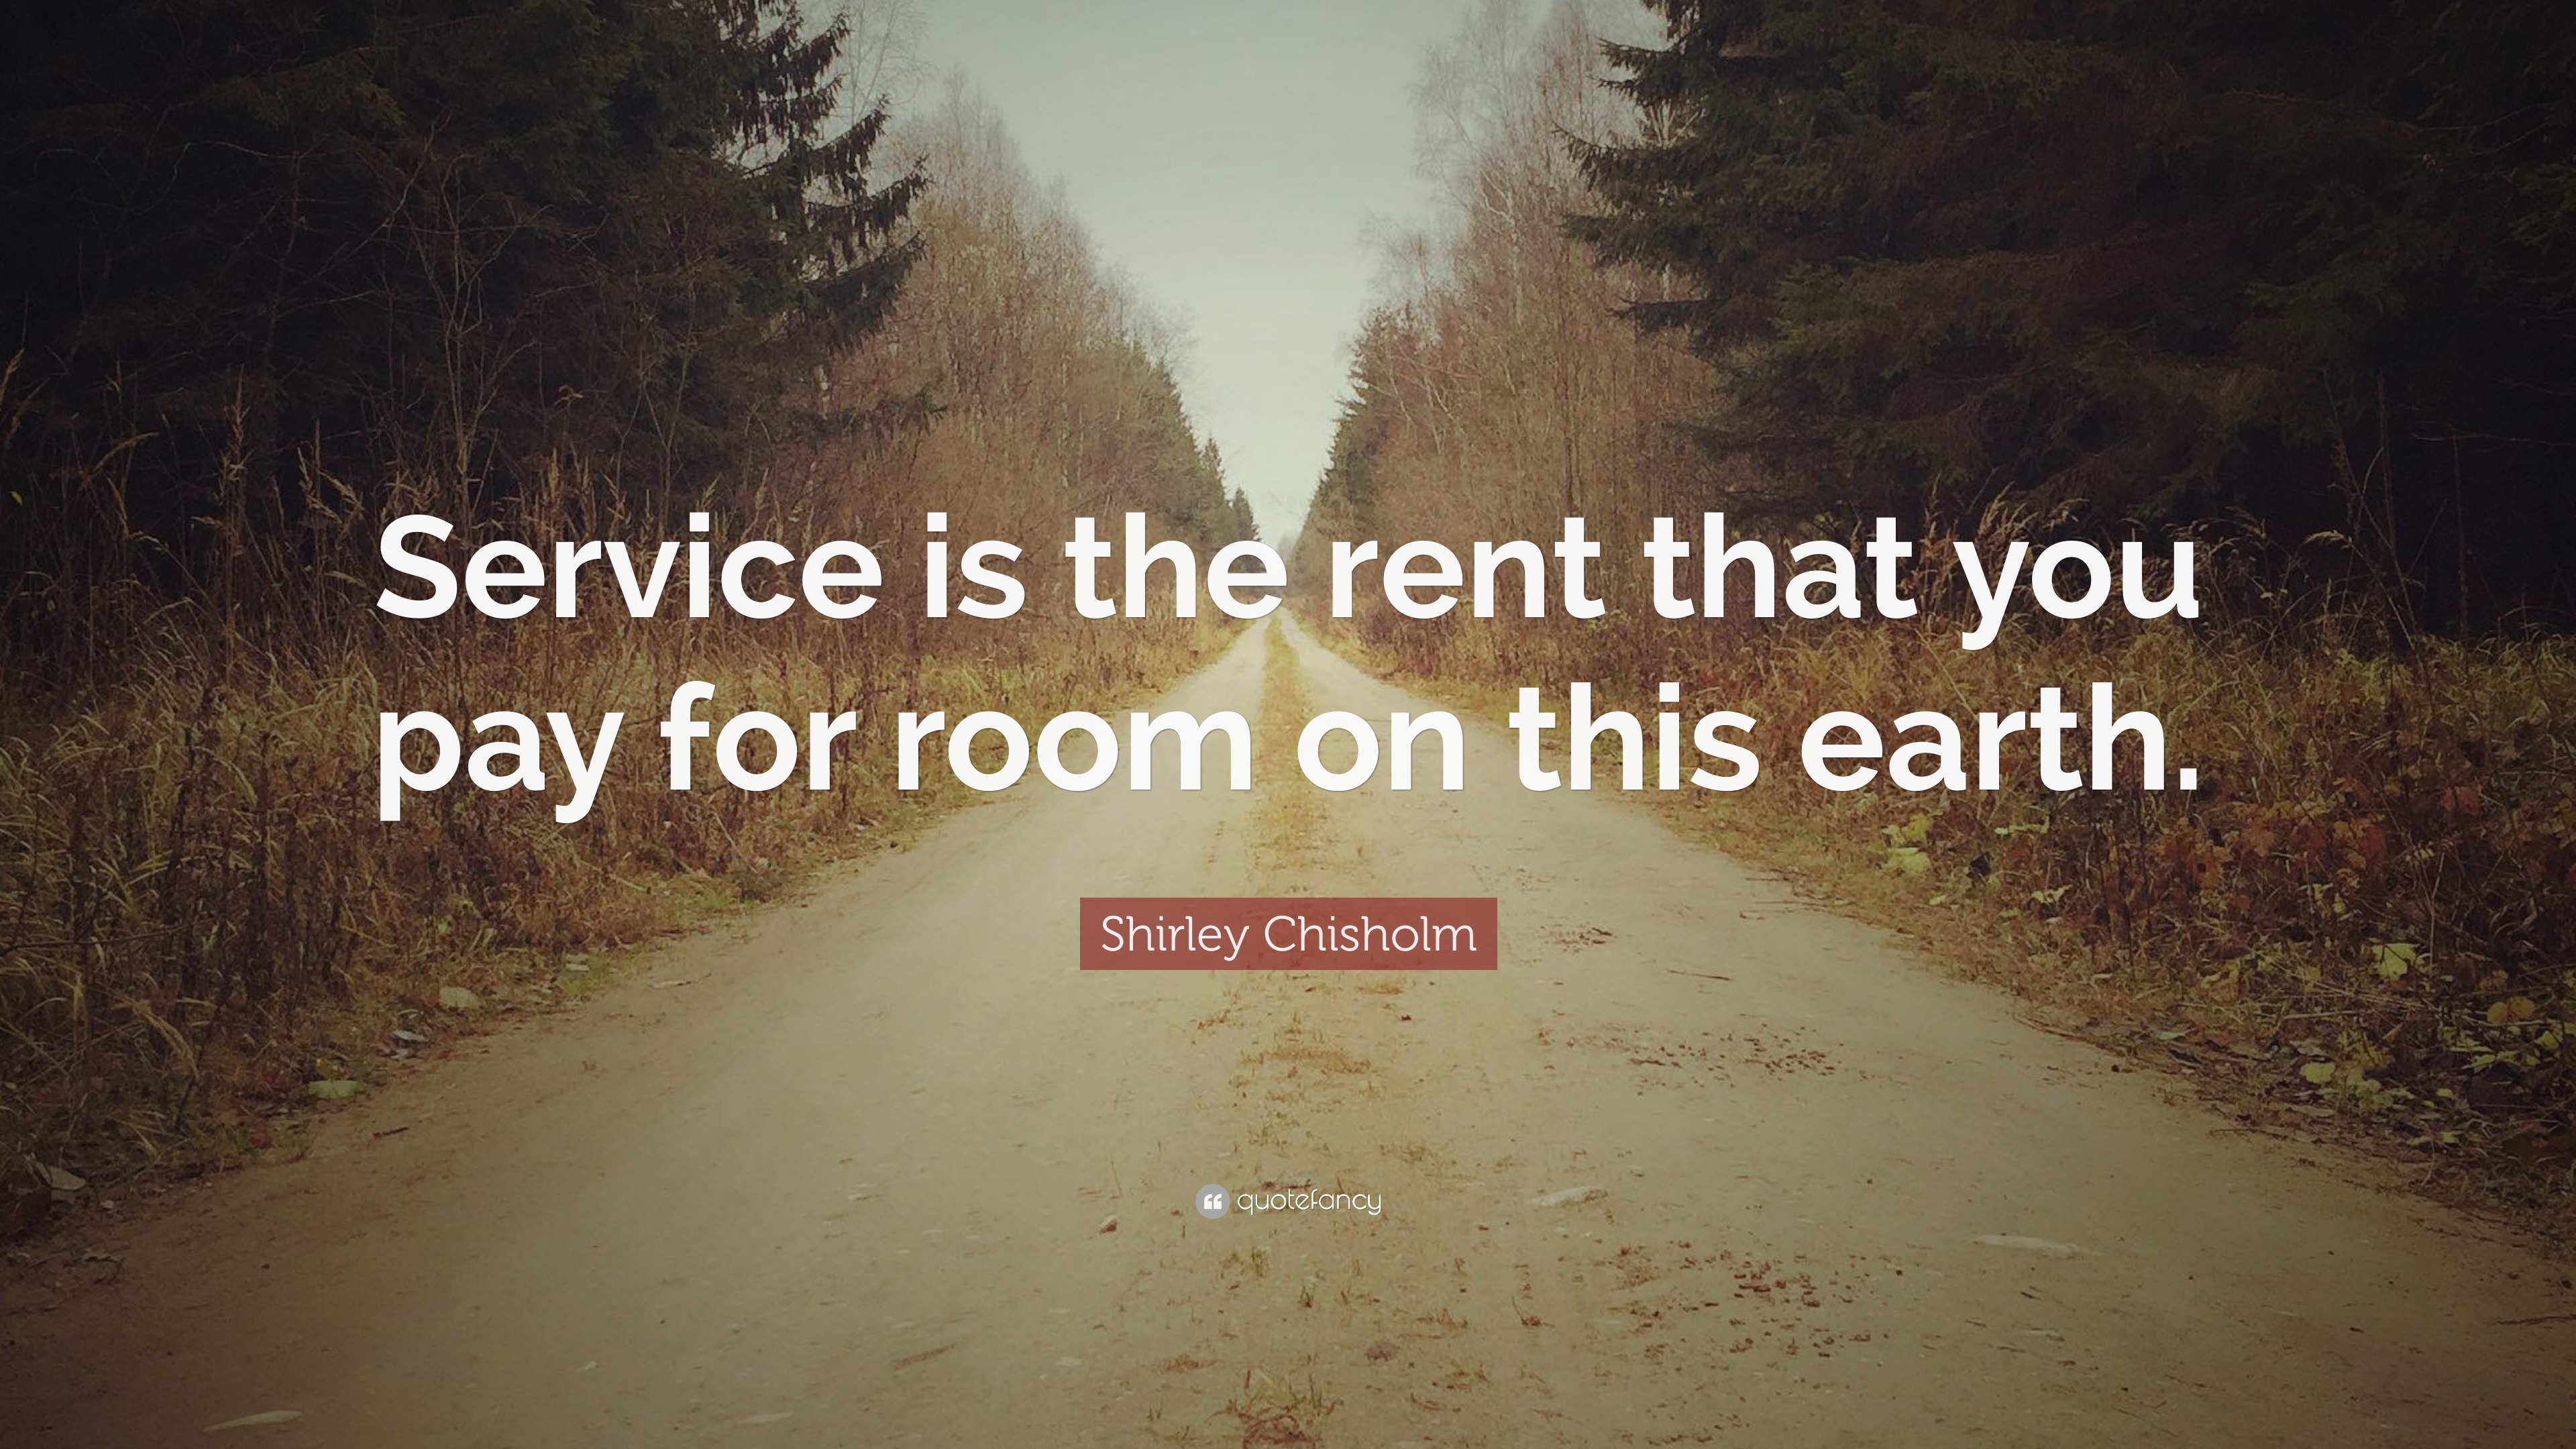 Shirley Chisholm Quote “Service is the rent that you pay for room on